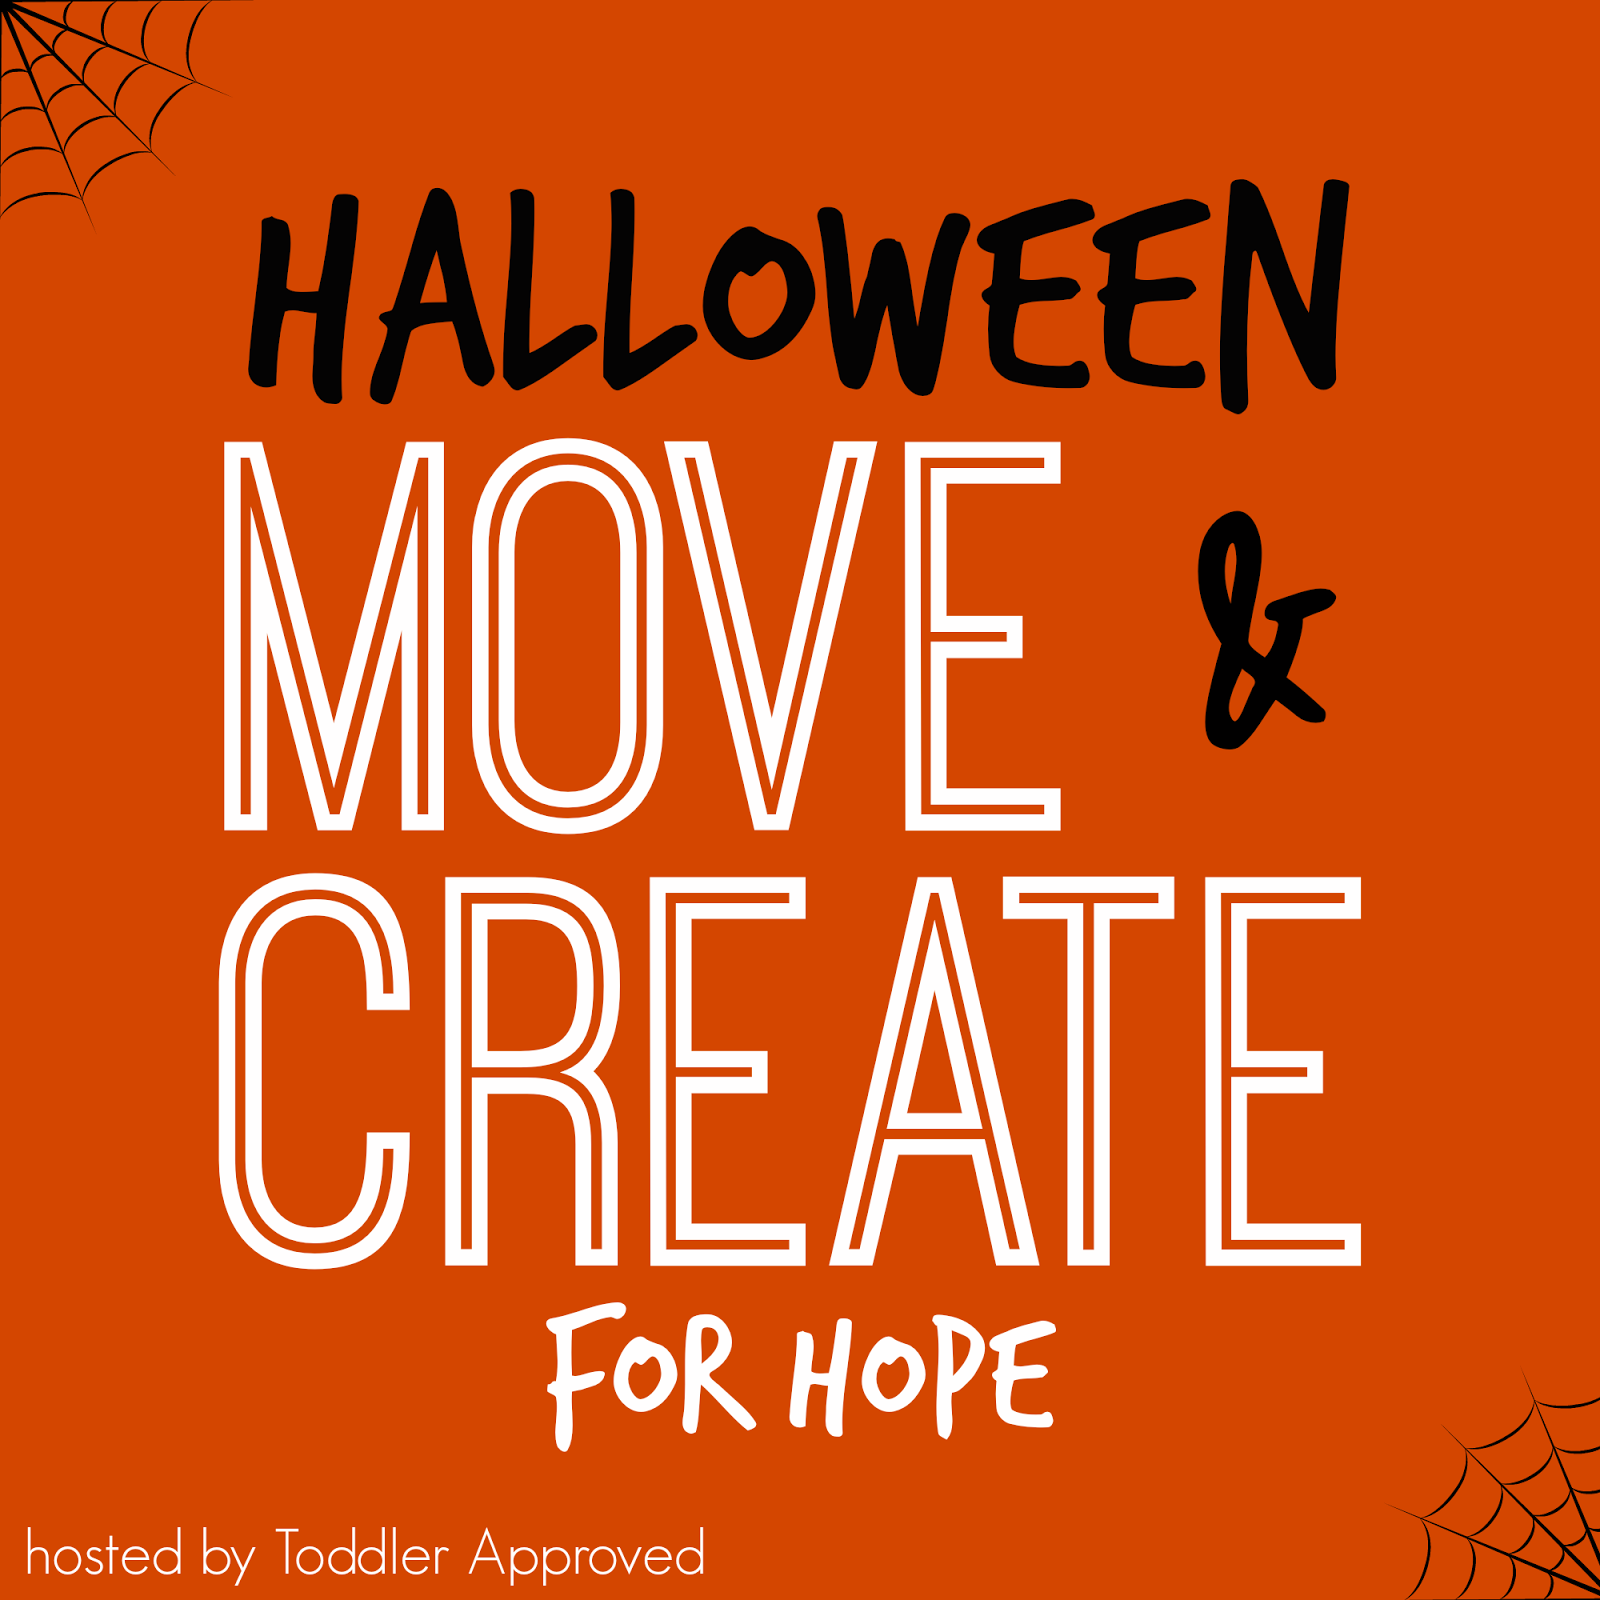 Halloween Move and Create Series to benefit Huntington's Disease research